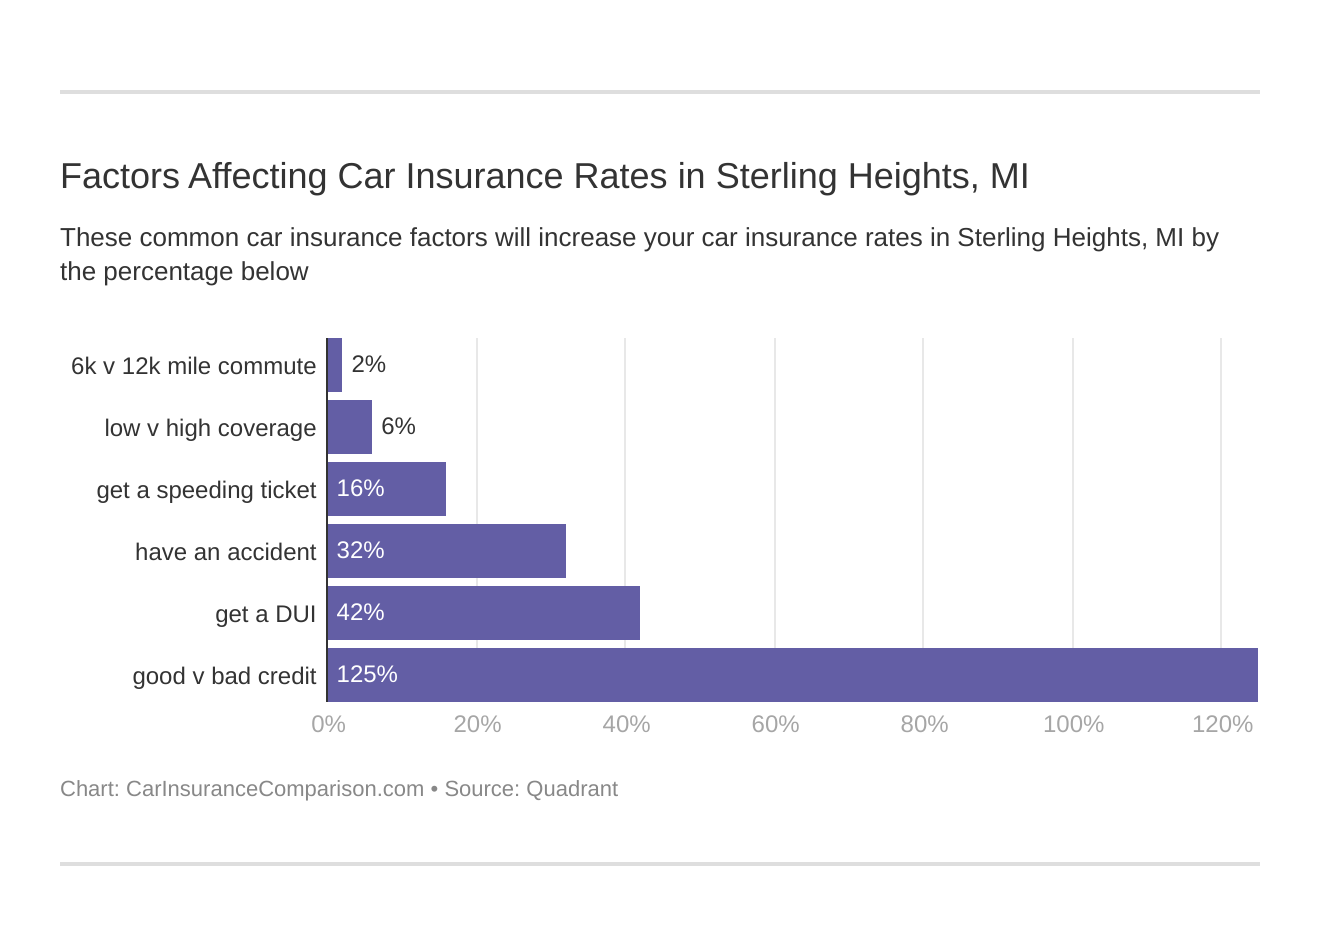 Factors Affecting Car Insurance Rates in Sterling Heights, MI